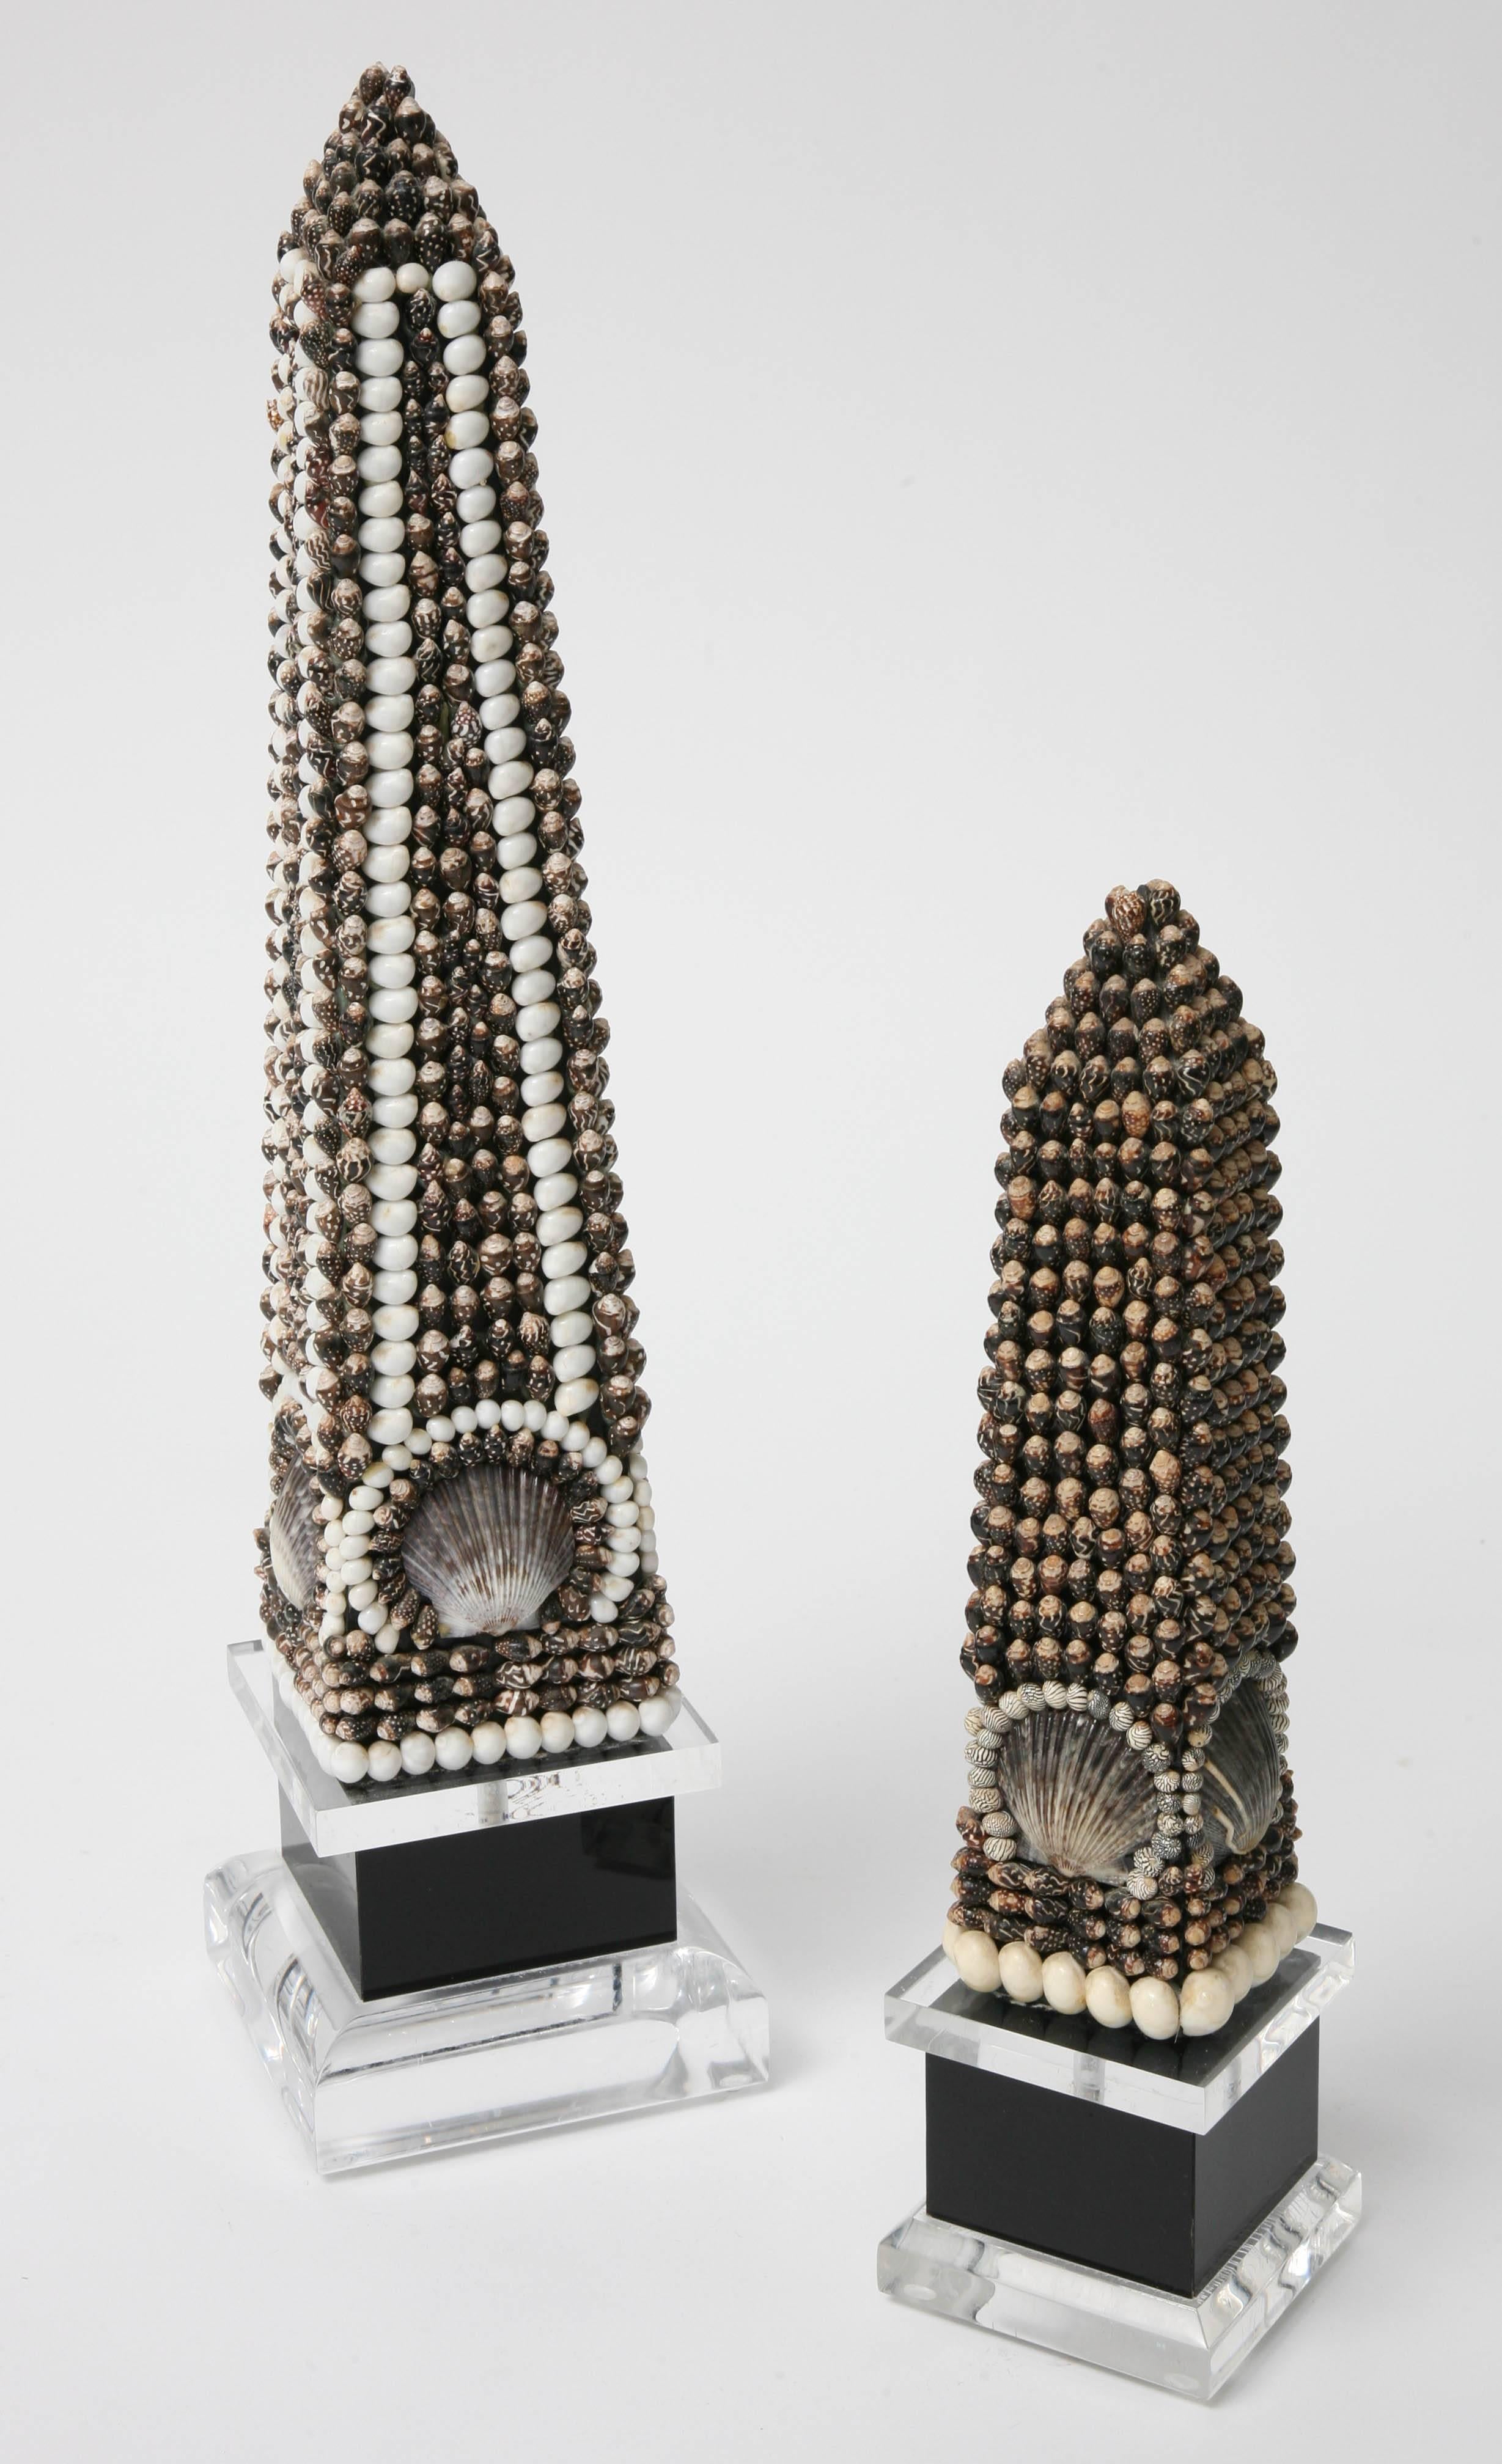 This set of obelisk are vey much in the style of pieces created by the iconic taste-maker Tony Duquette in the 1960s. They are fabricated of Lucite obelisk that have been encrusted with sea shells in dark bronze, black, beige and off-white